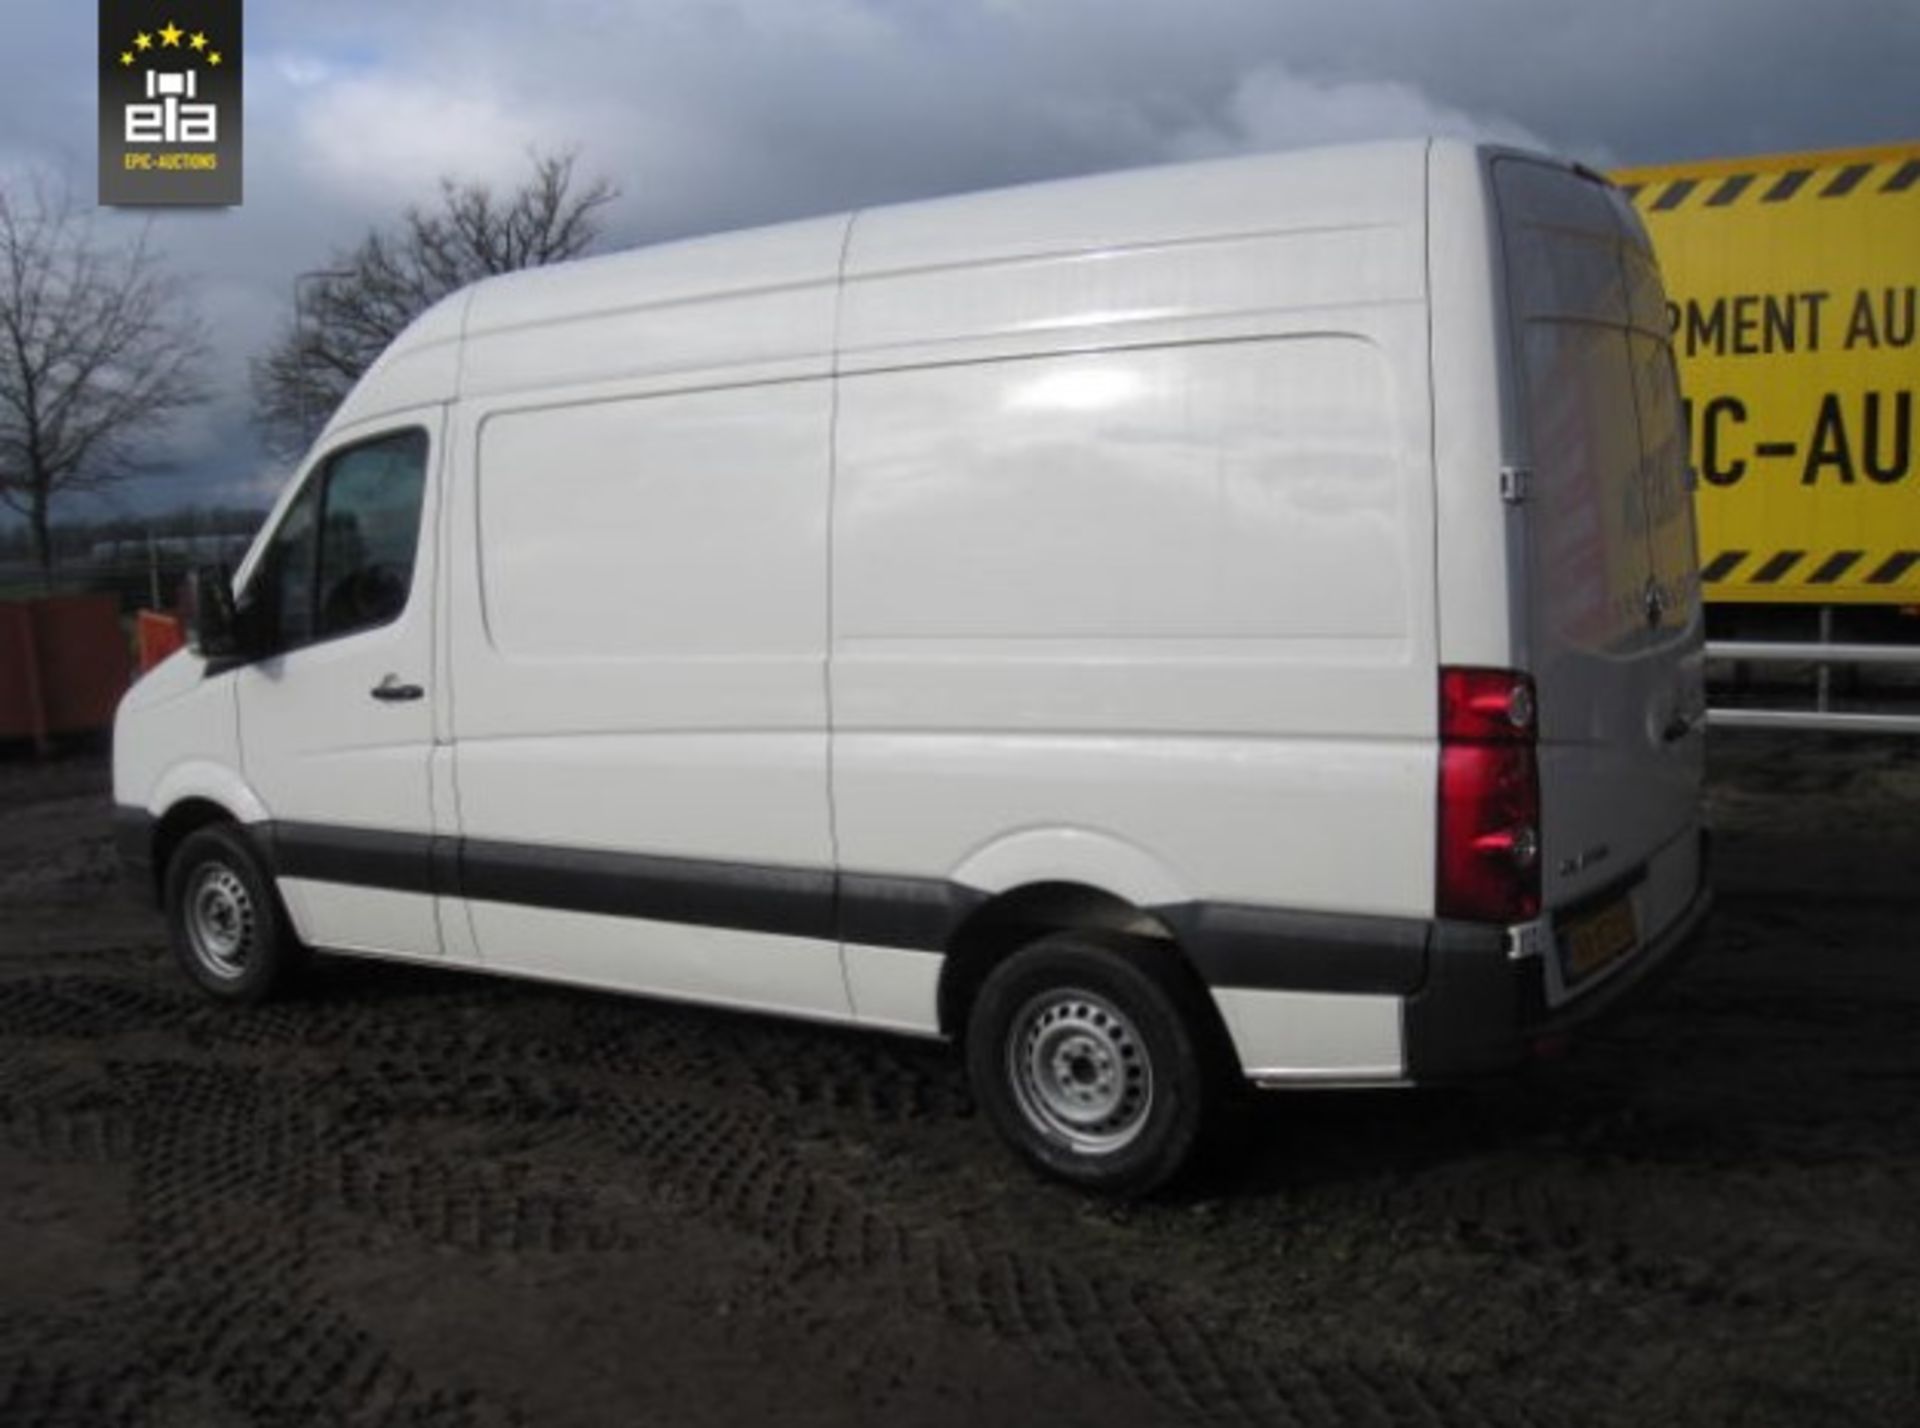 2011 Volkswagen Crafter 2.5 TDI L2H2 20151051 - Image 3 of 26